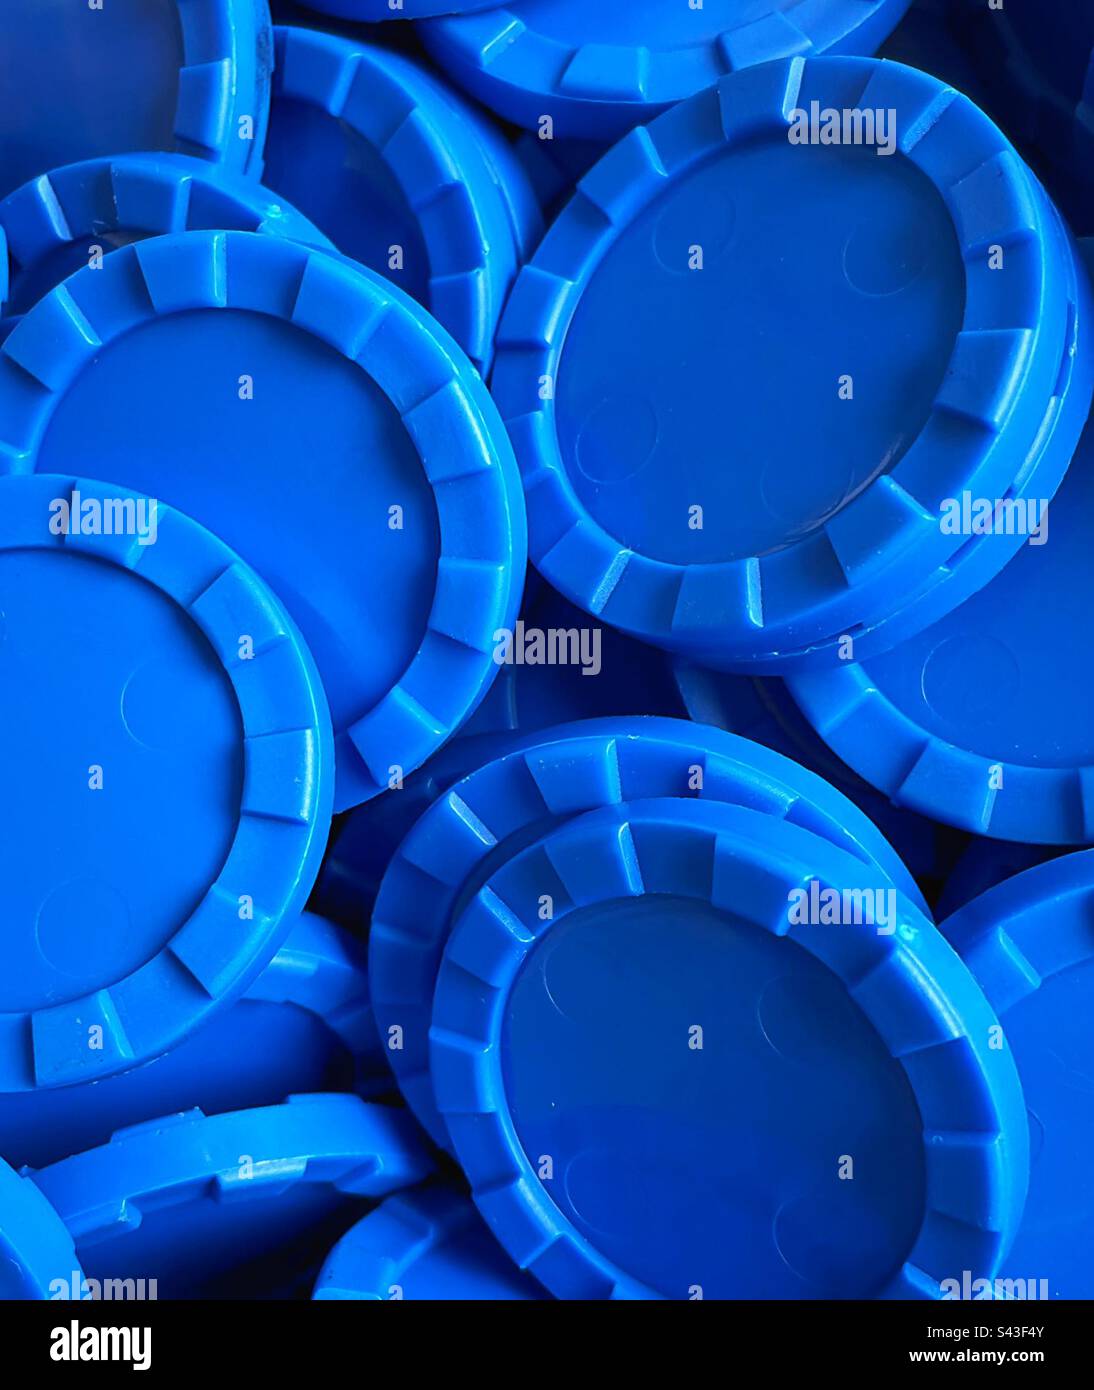 Blue counters or ‘chips’ in a pile, close up. Stock Photo